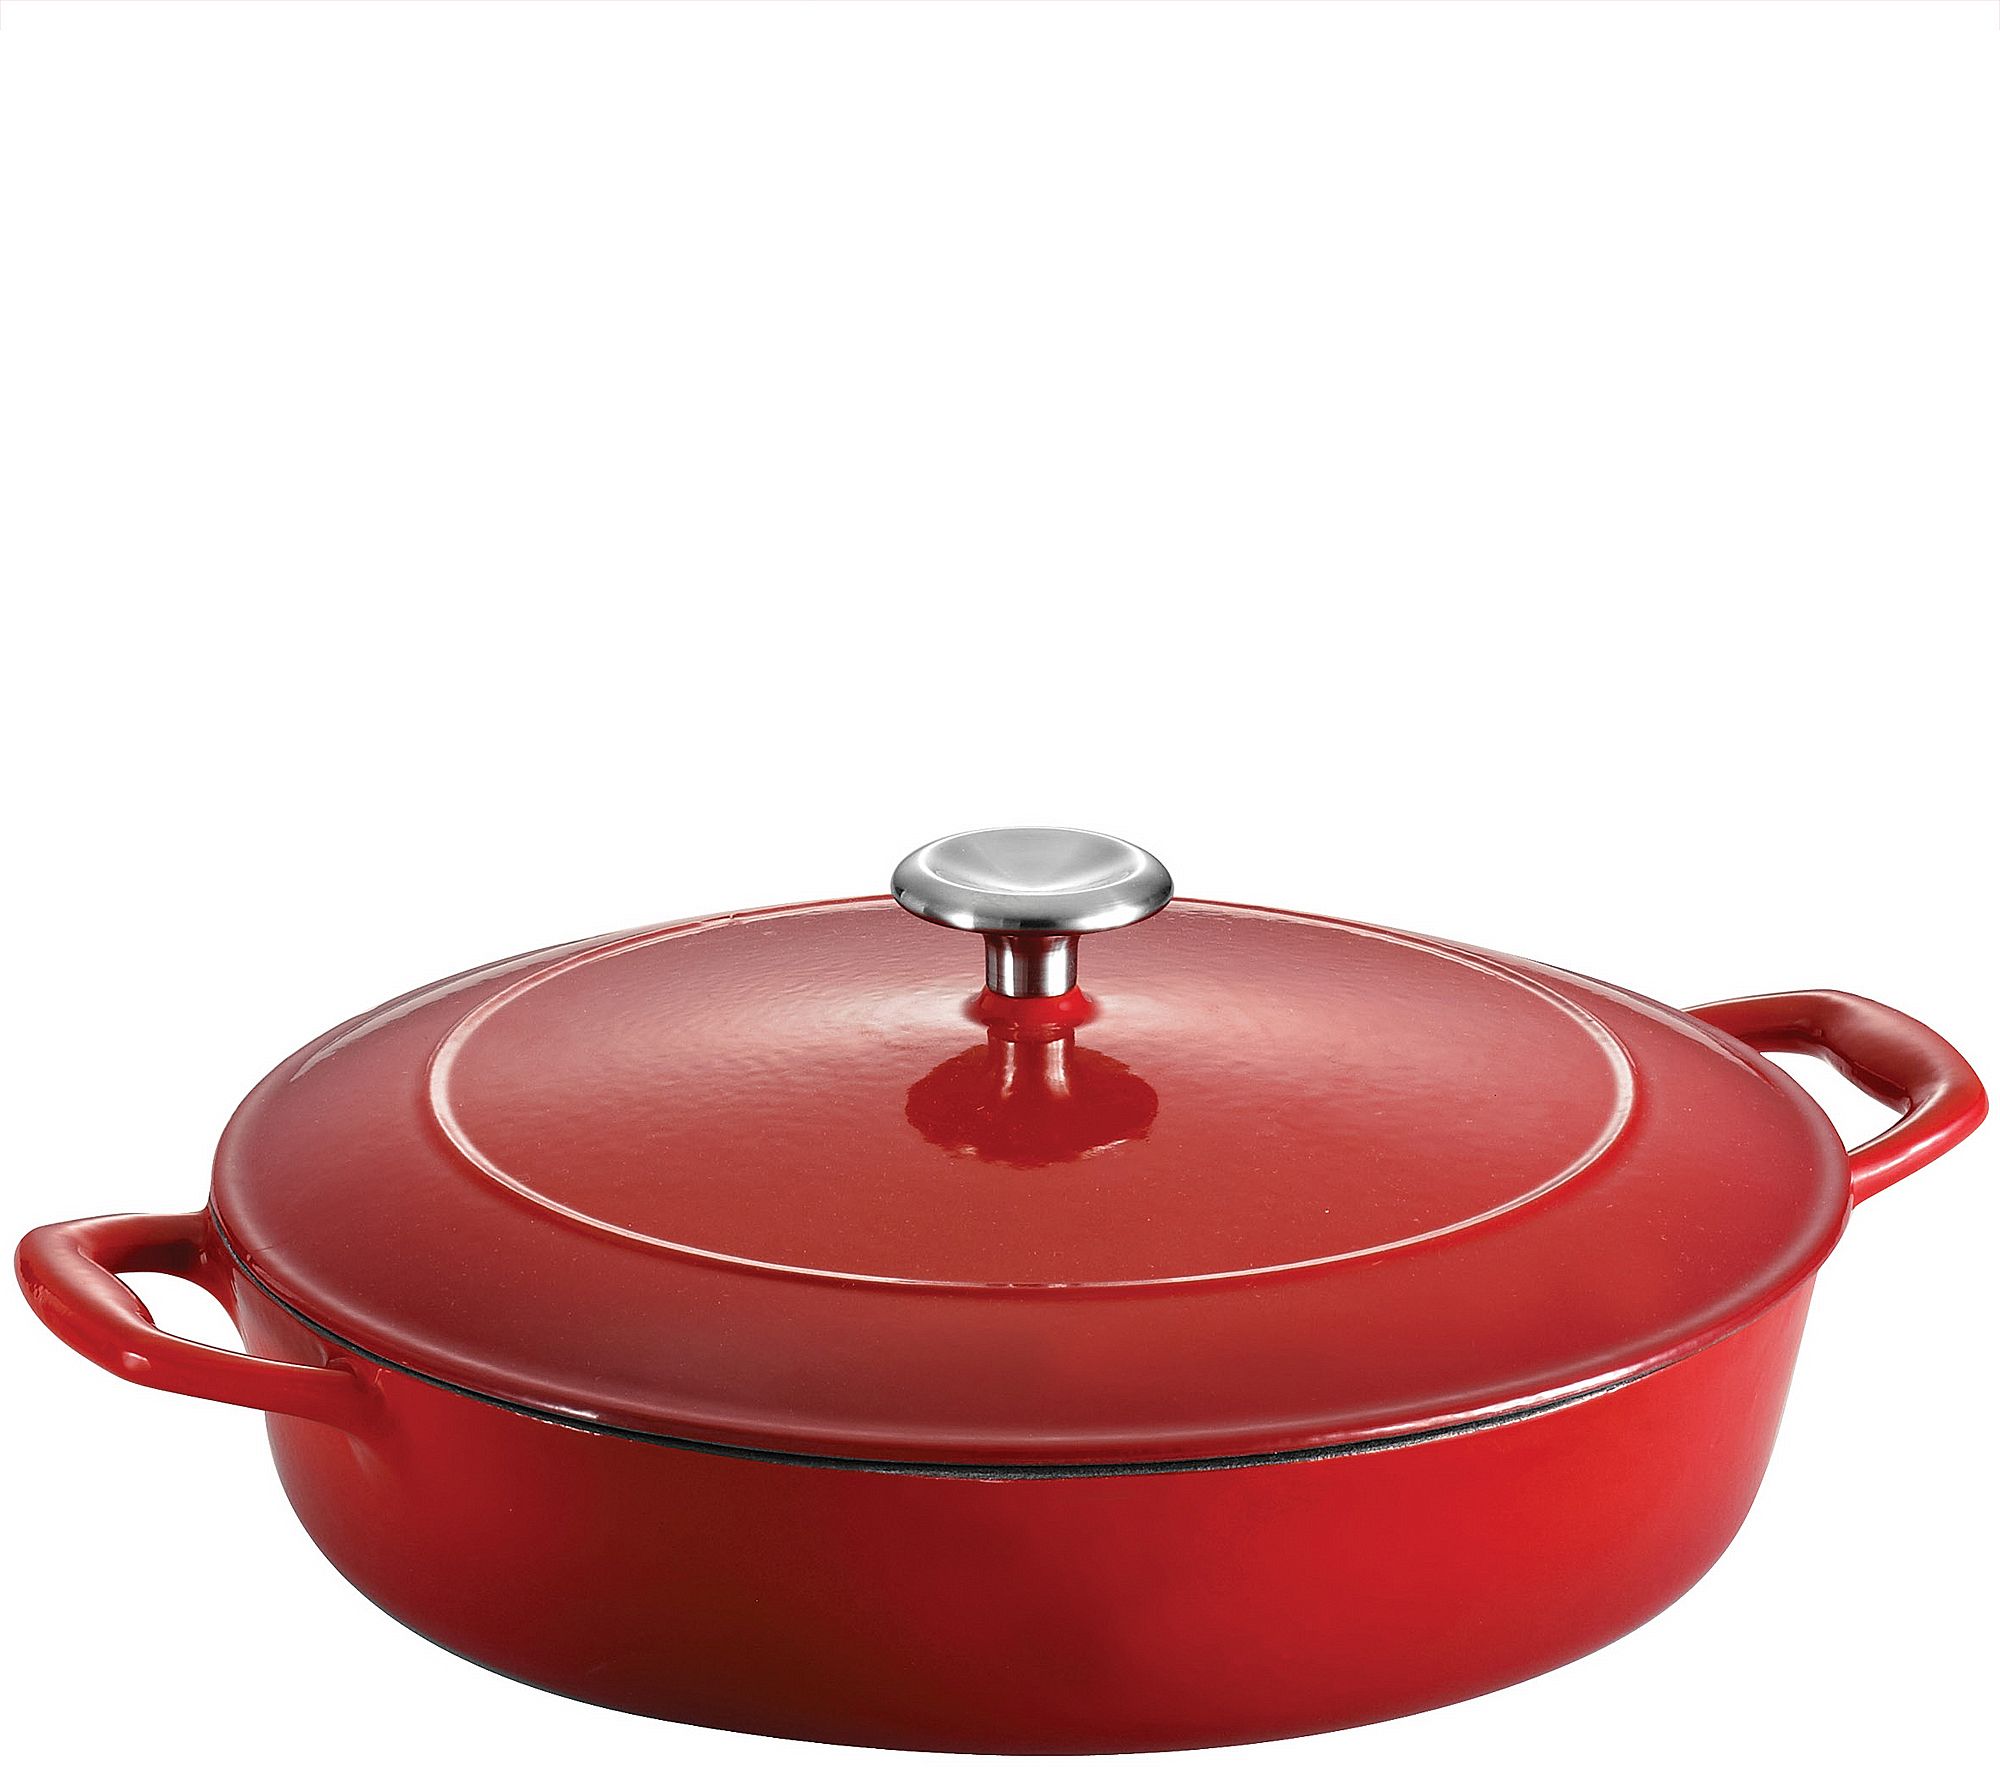 Tramontina Gourmet 2.5qt Enameled Cast Iron Sauce Pan with Lid Red